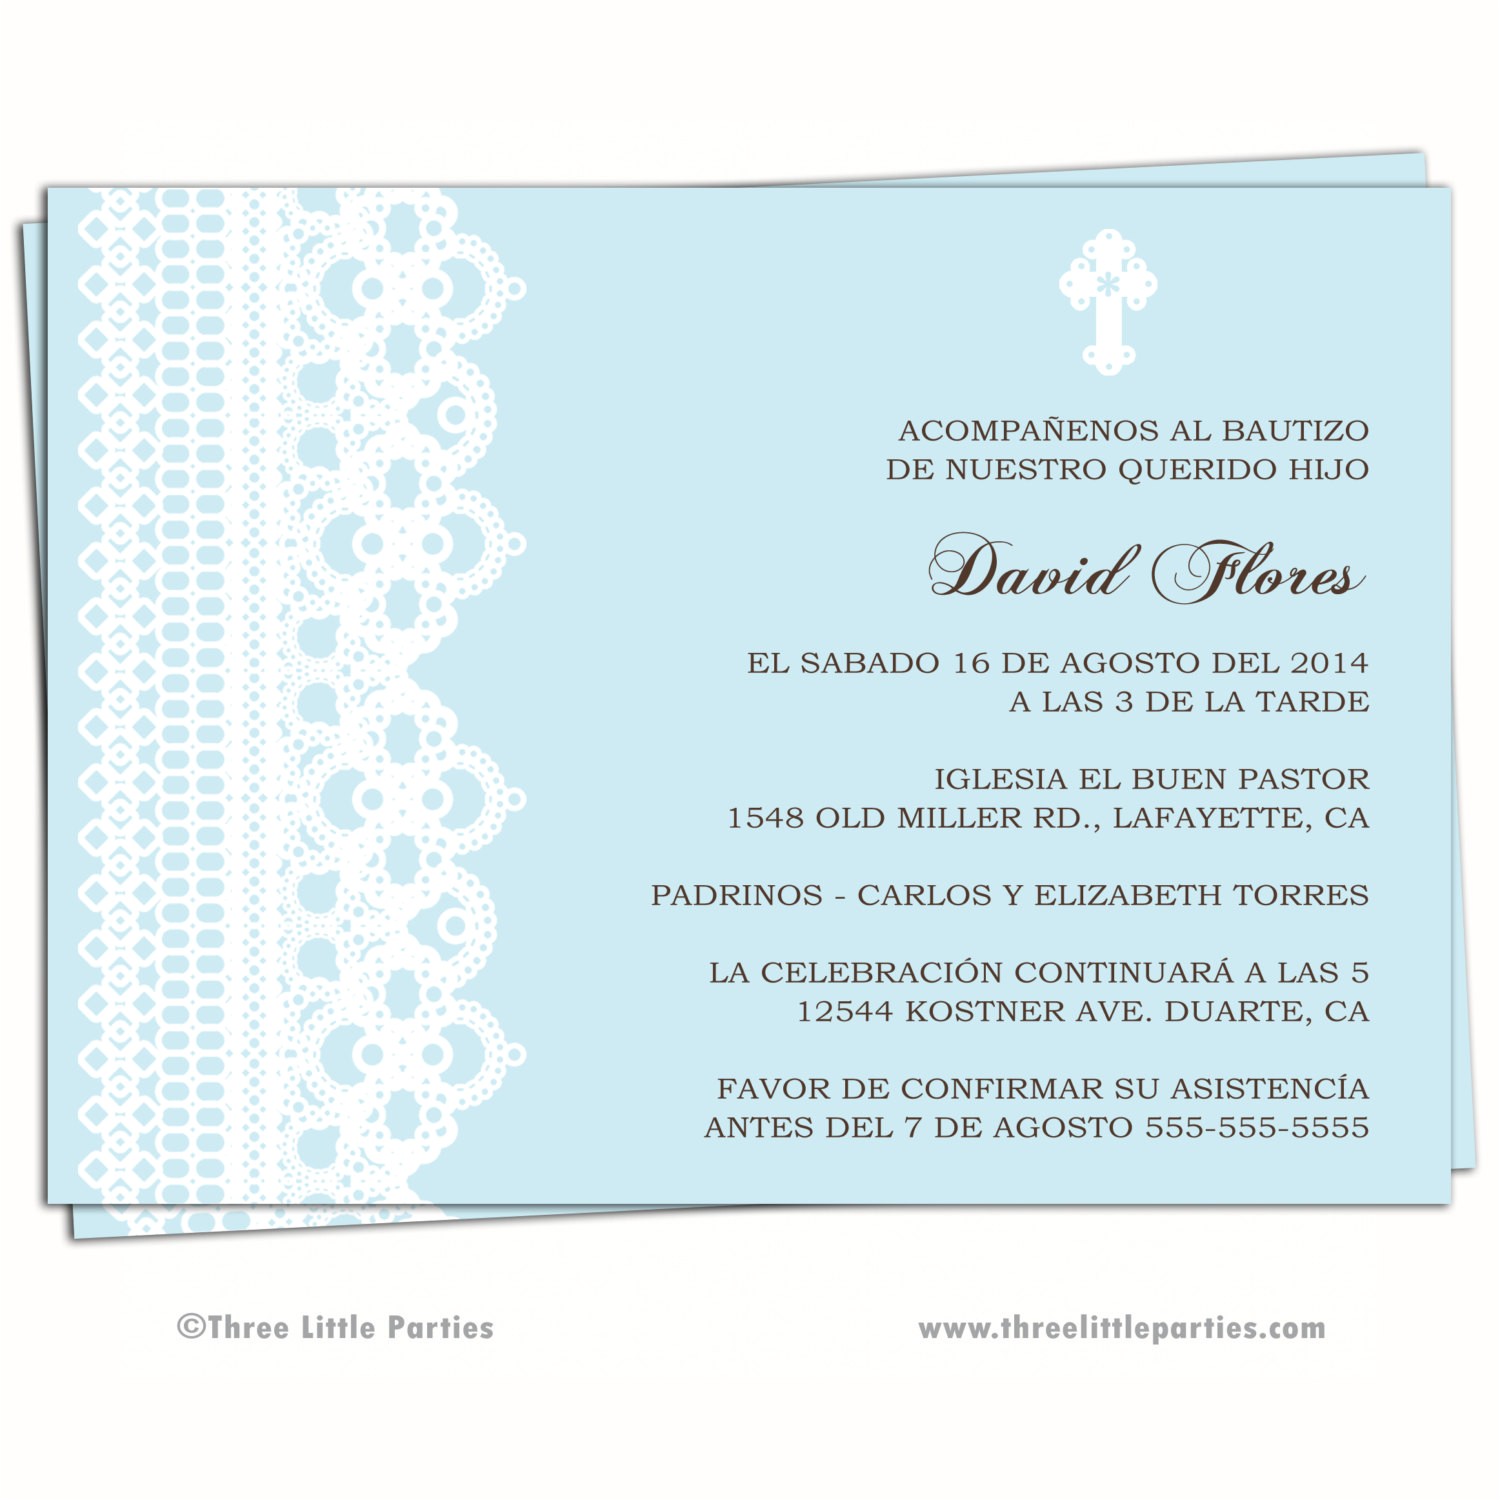 Personalized Baptism Invitations In Spanish Spanish Baptism Invitation Printable Lace for Boy or Girl